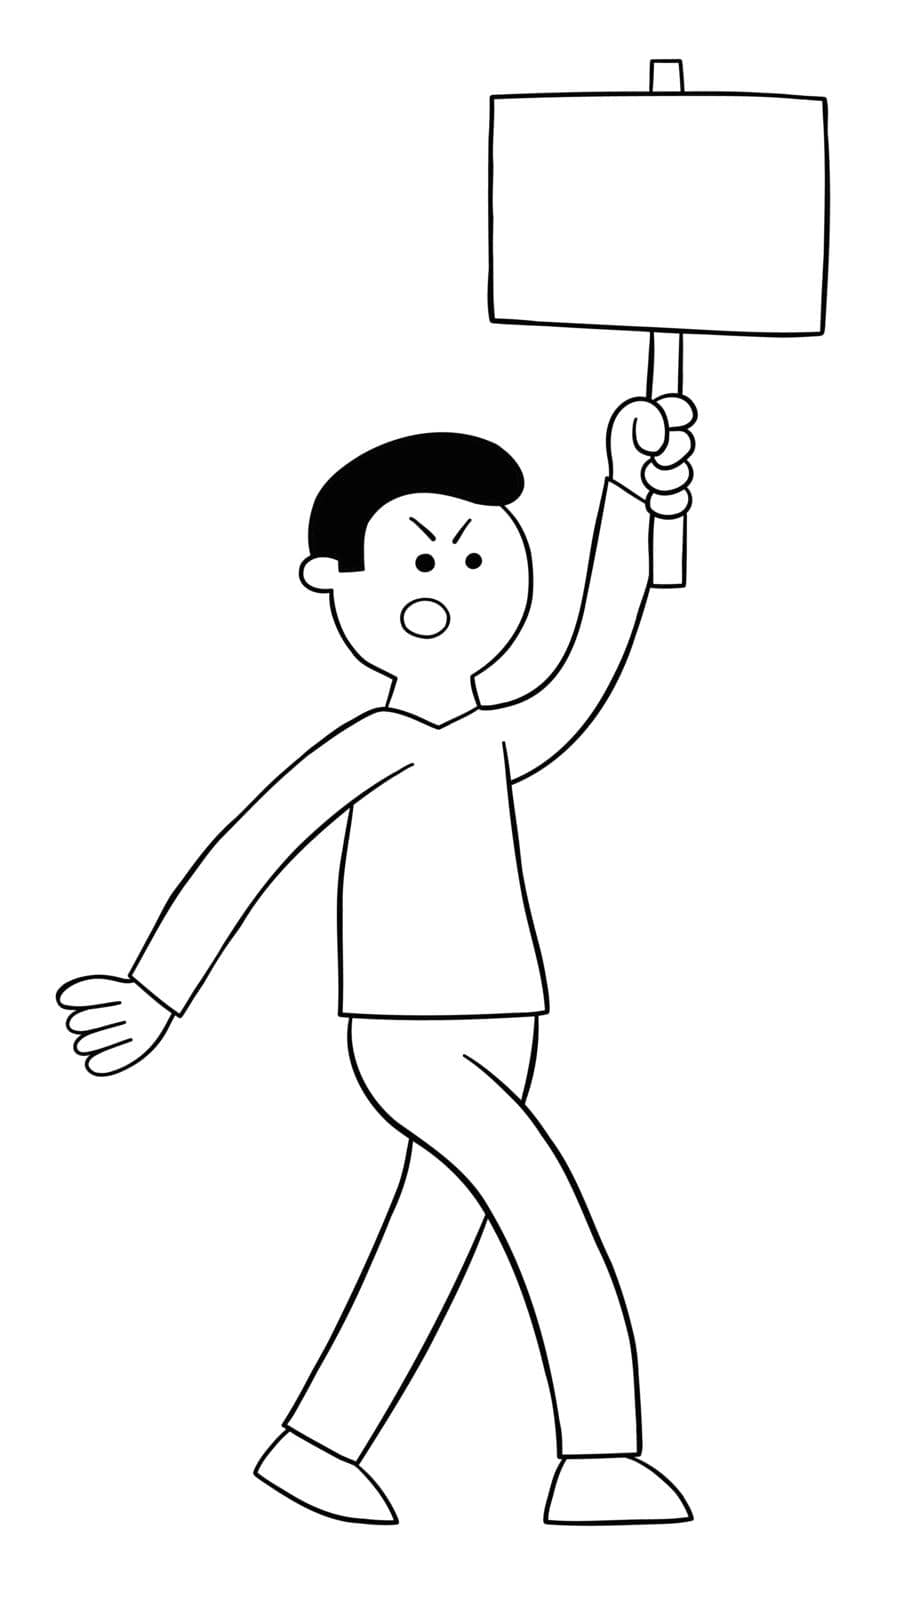 Cartoon angry protester man holding wooden sign and walking, vector illustration by emrahavci